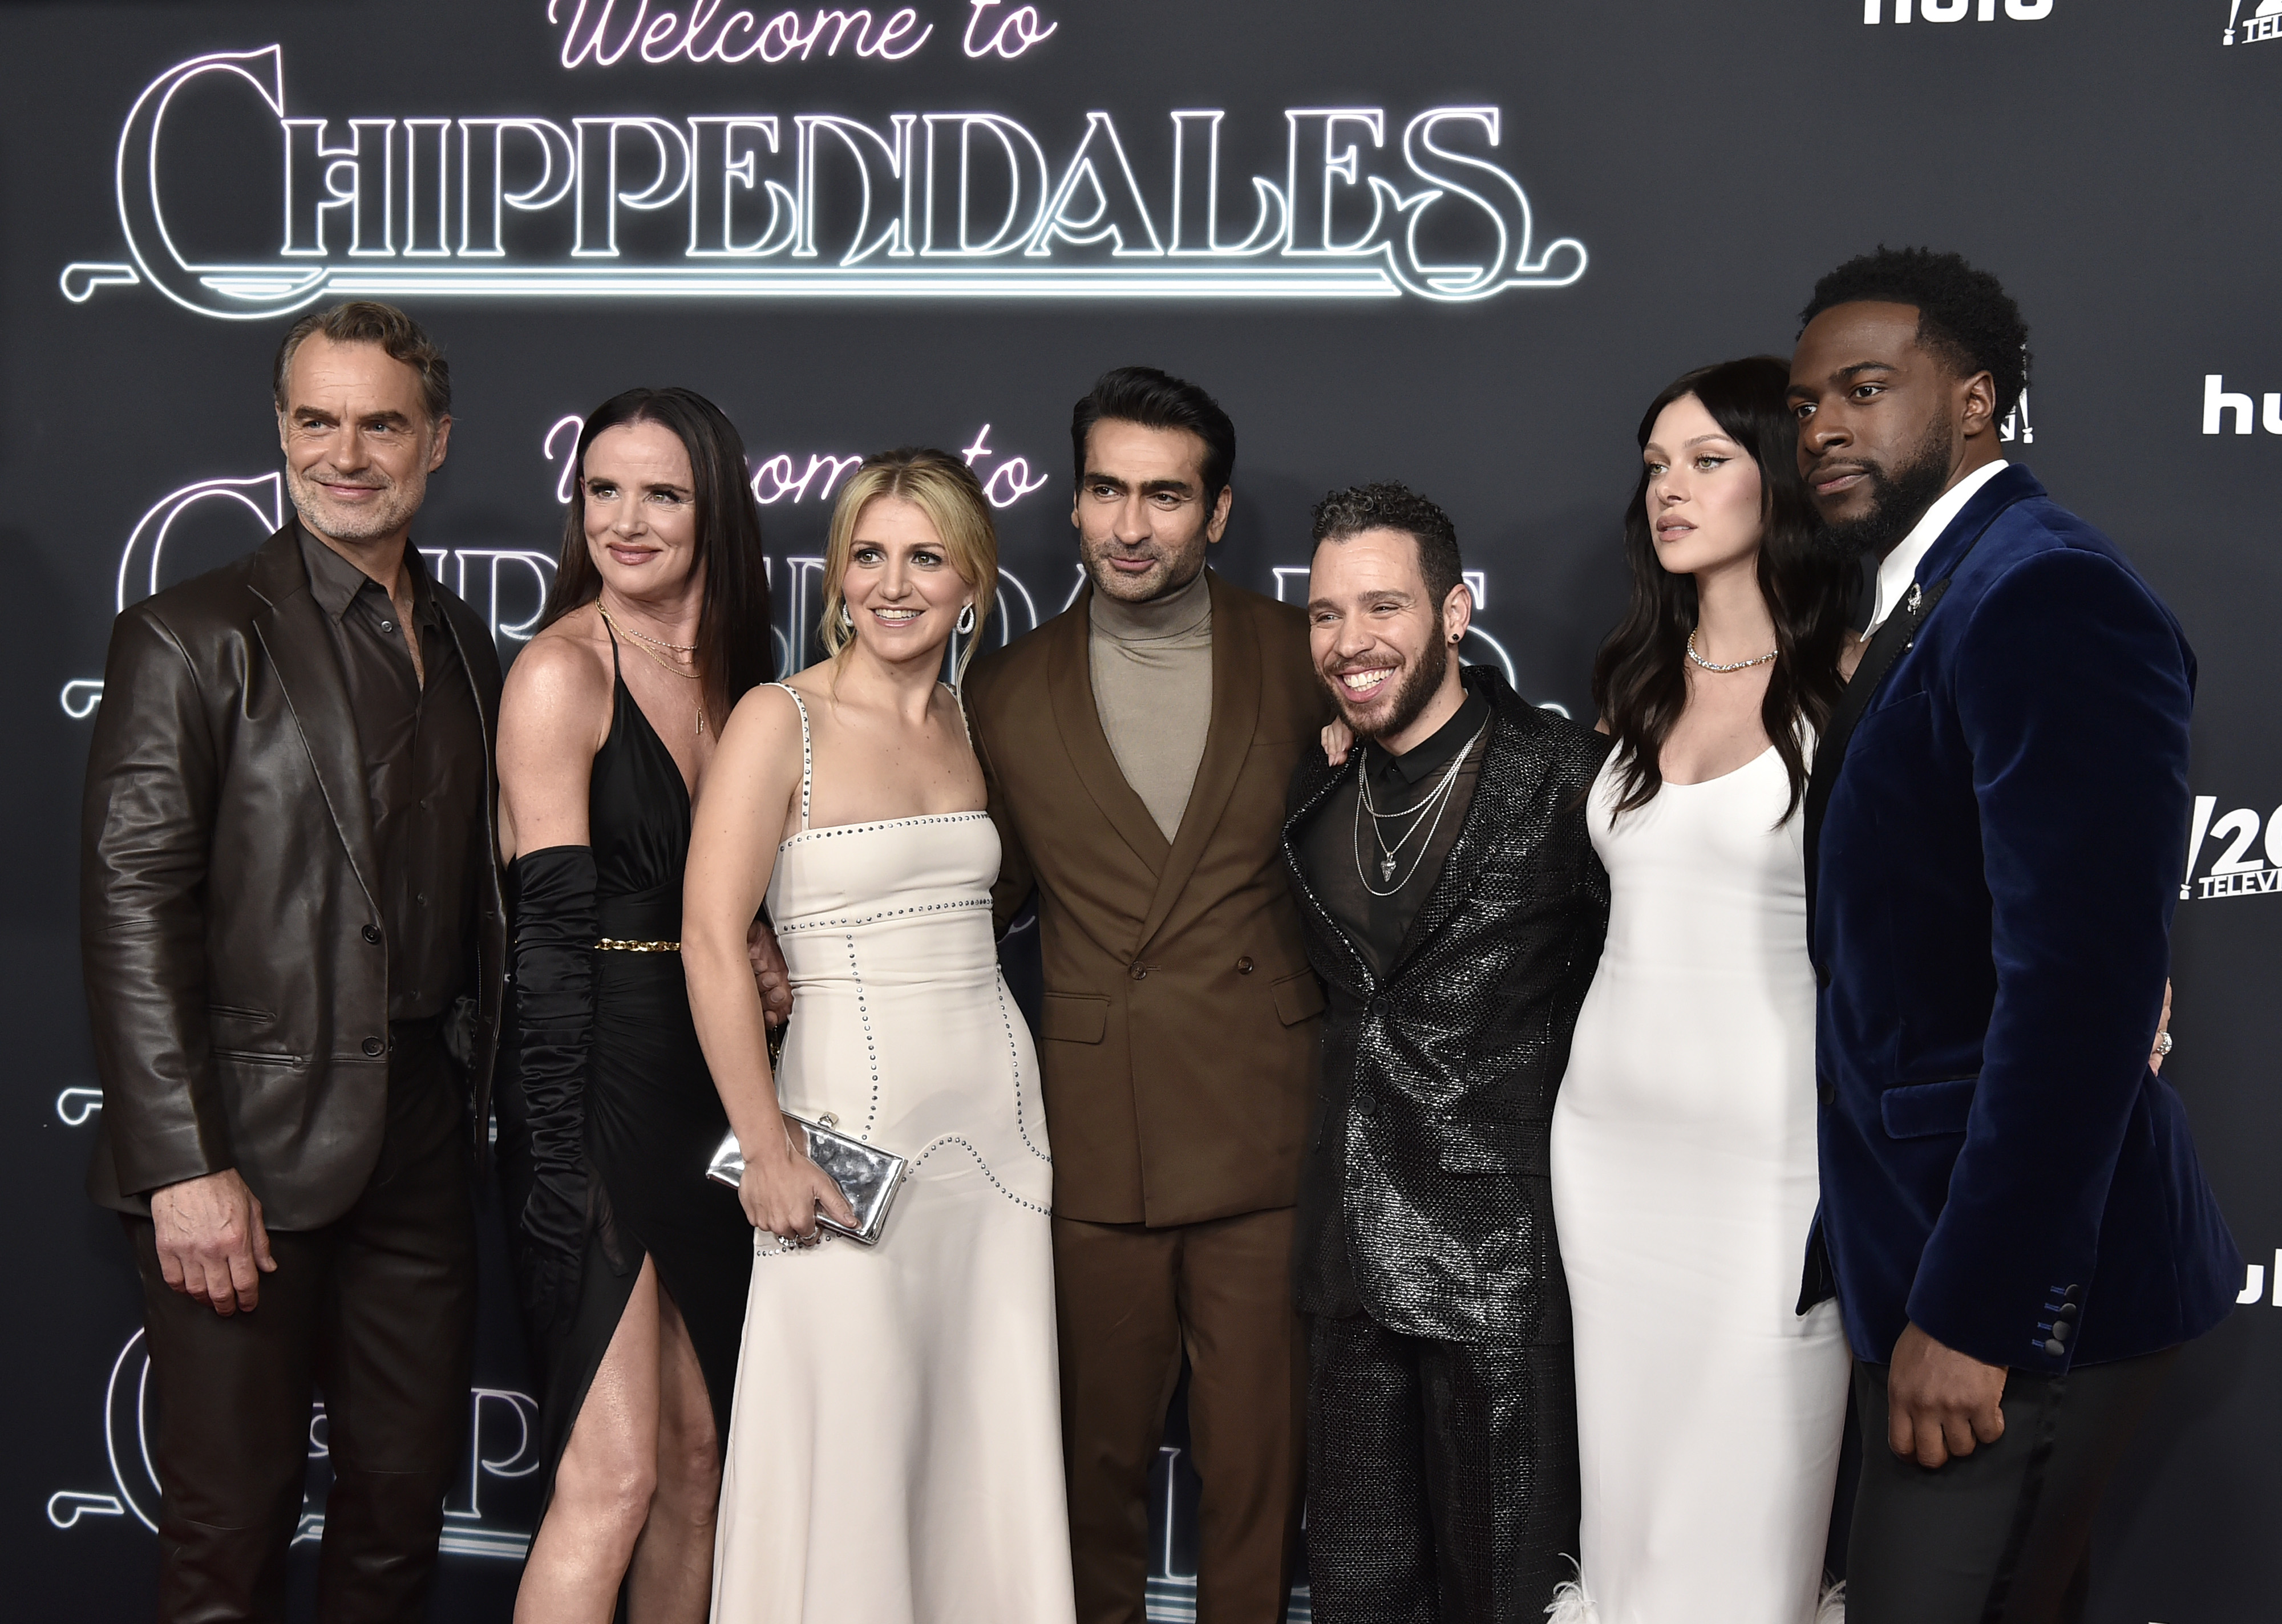 Here's Why Kumail Nanjiani Says He Couldn't Refuse His ‘Welcome to
Chippendales' Role